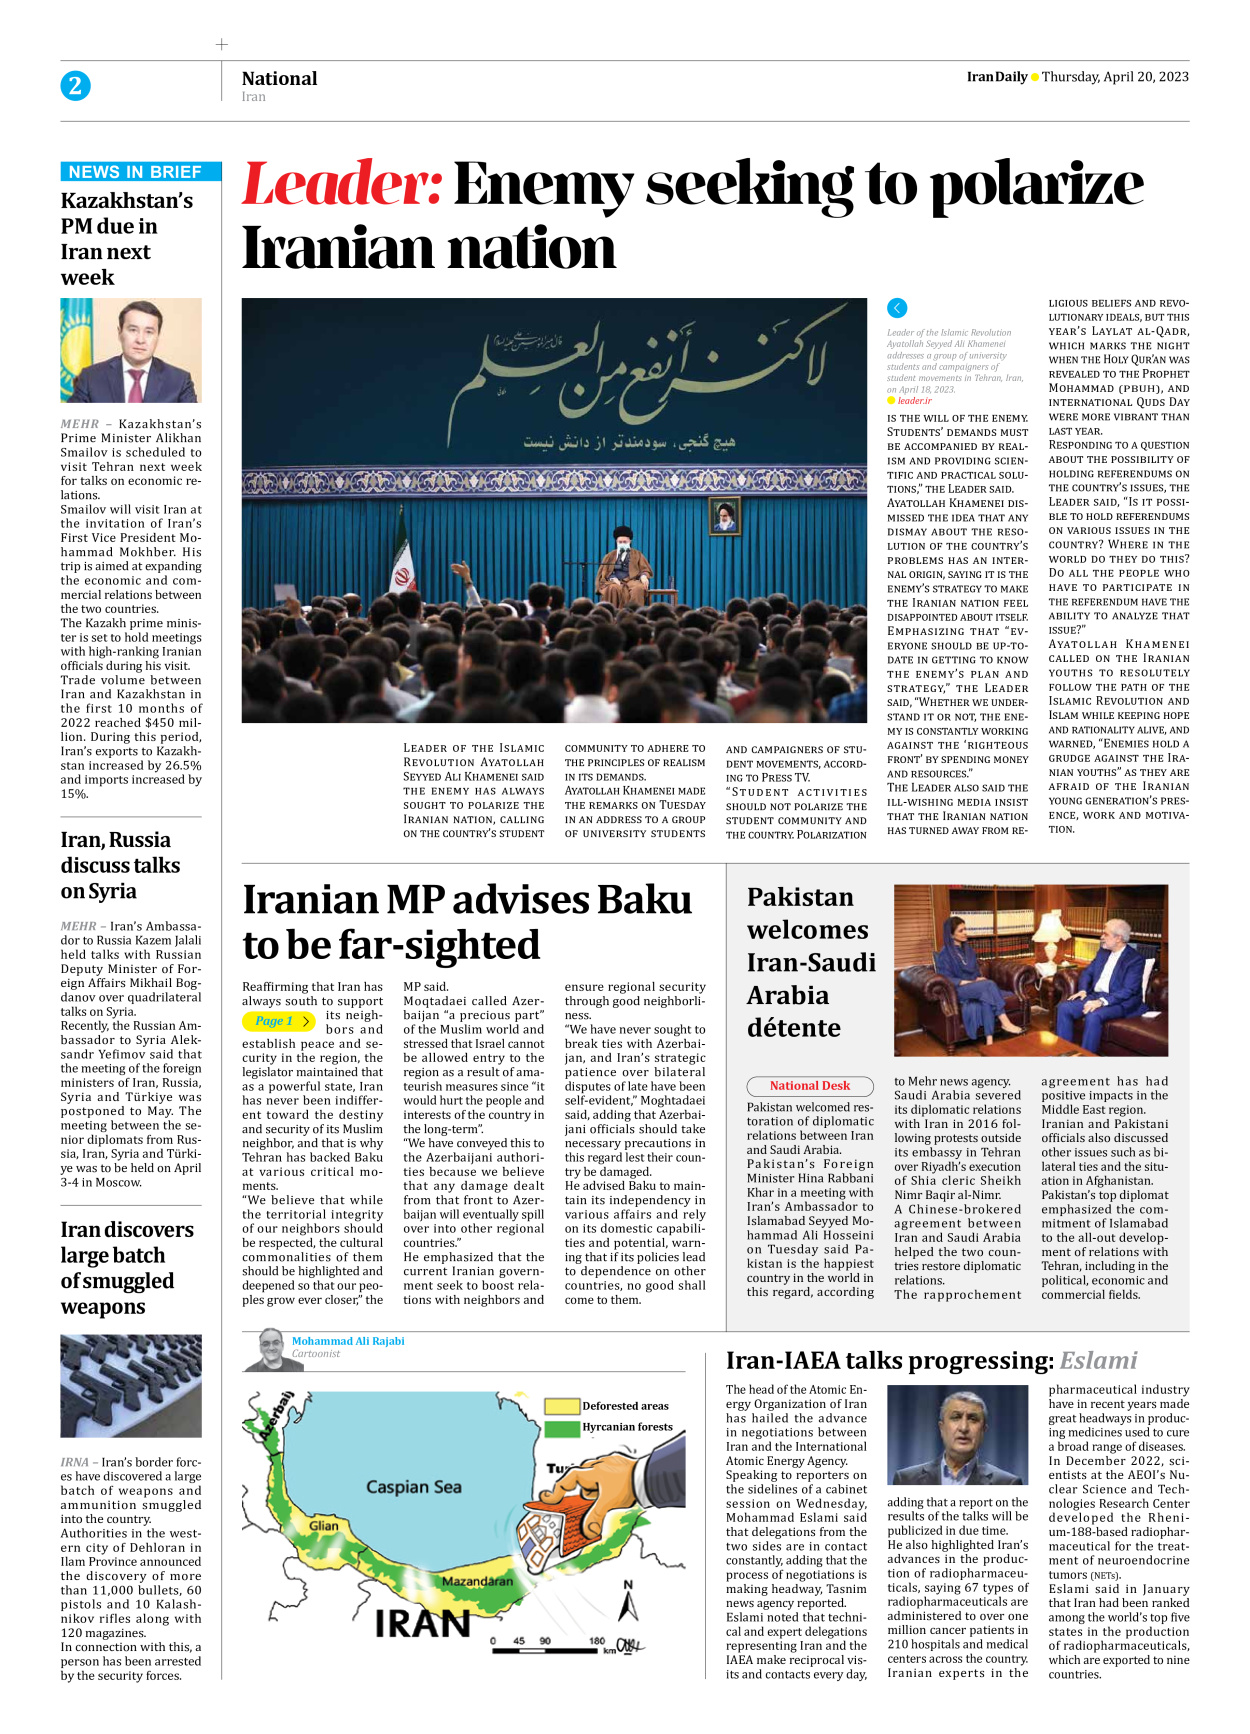 Iran Daily - Number Seven Thousand Two Hundred and Seventy Three - 20 April 2023 - Page 2